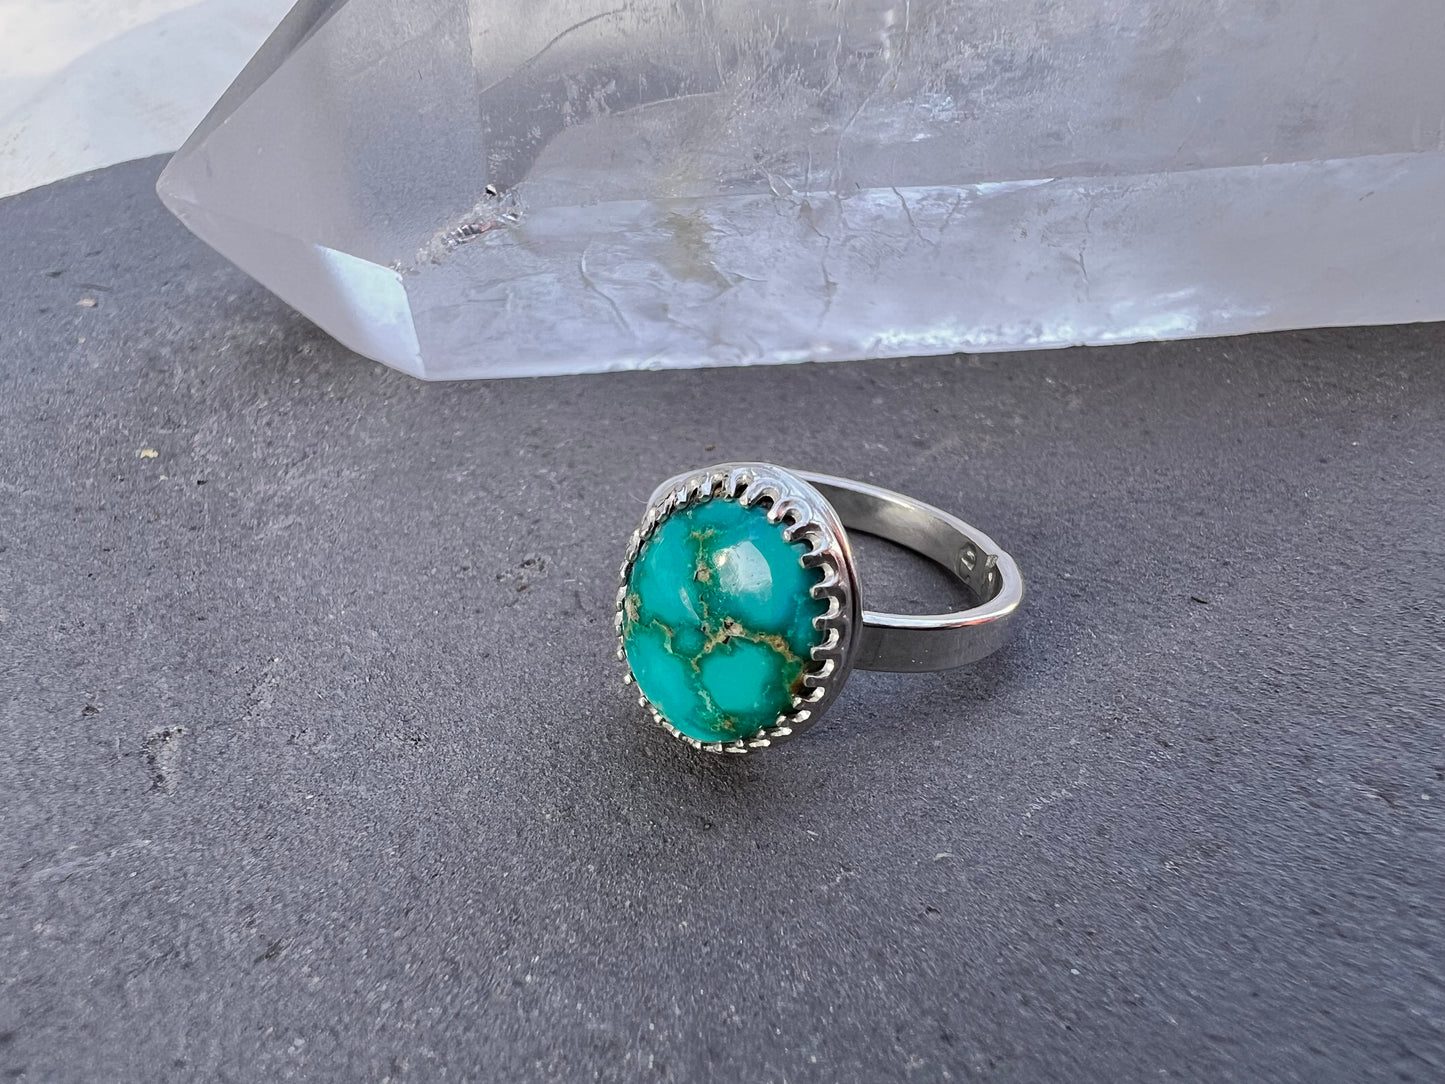 Sonoran Rose Turquoise, Size 6/6.25